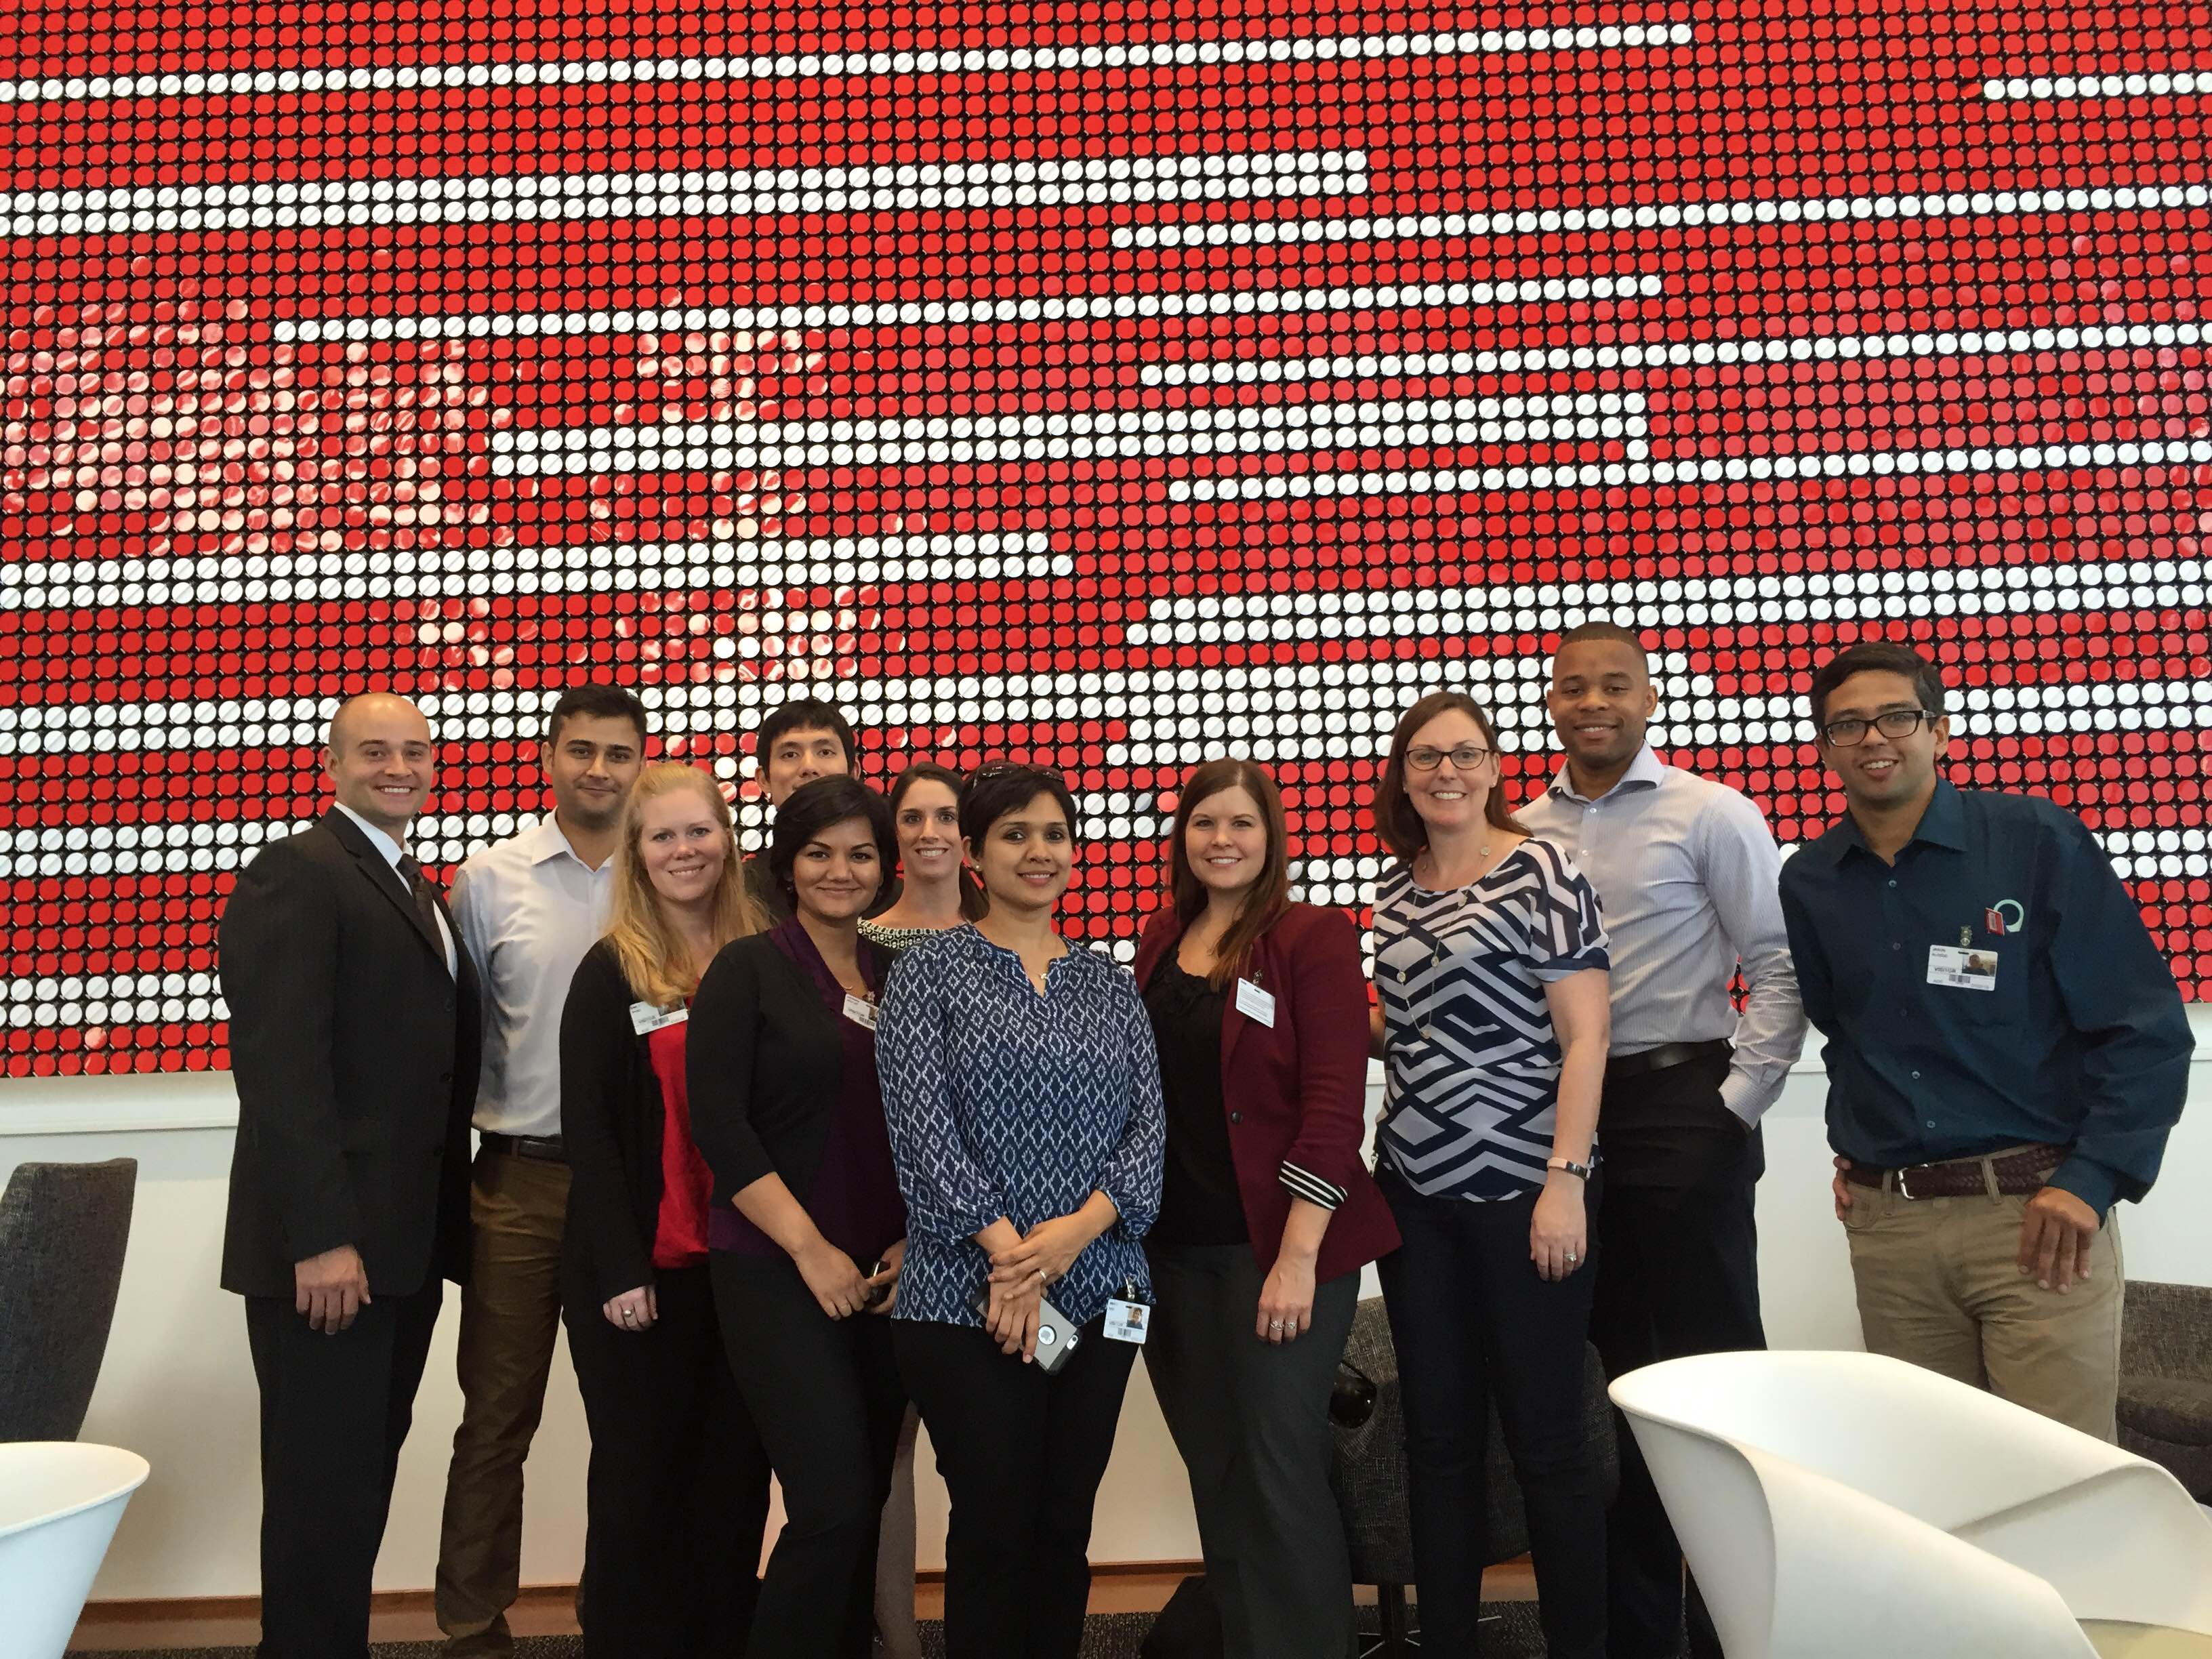 Georgia Tech MBA Net Impact chapter members with Georgia Tech MBA alumna and Coca-Cola employee Ashley Vanderpoel, in front of Coca-Cola's flip-disk wall